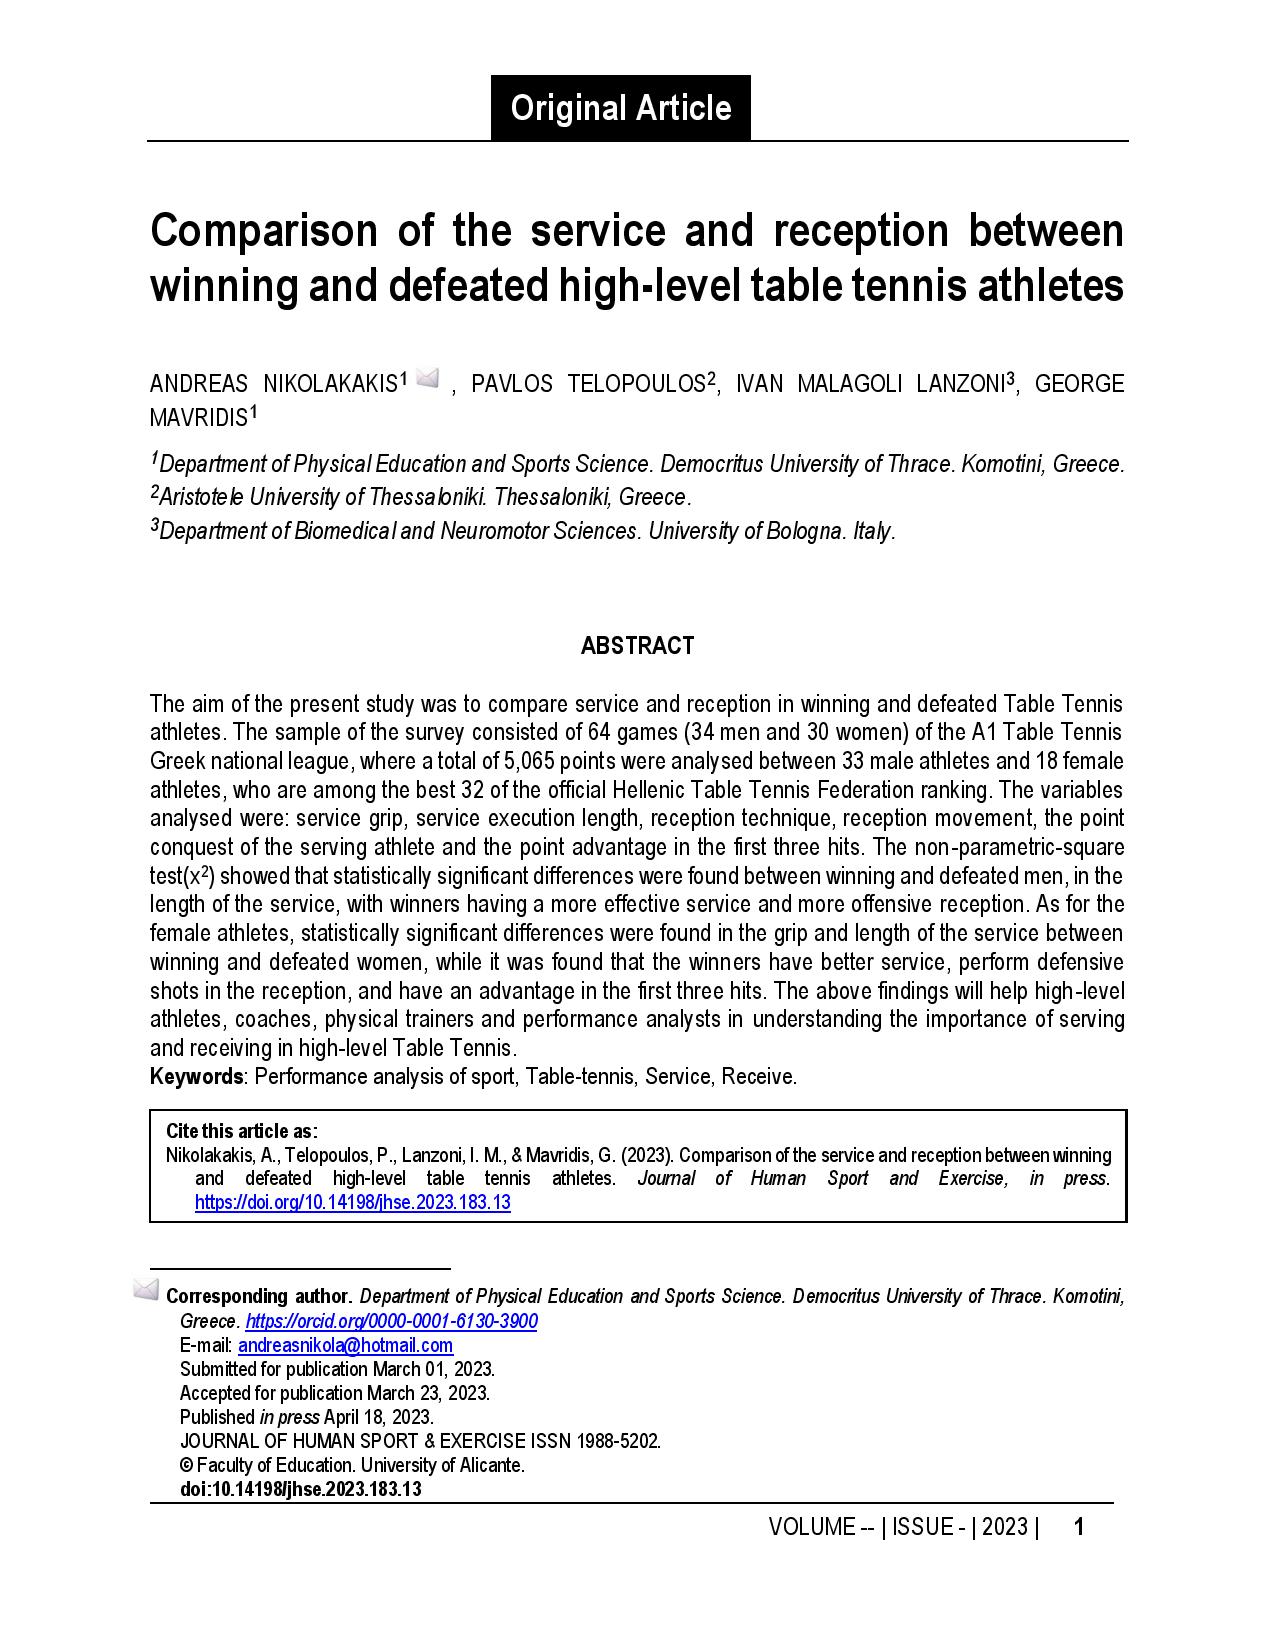 Comparison of the service and reception between winning and defeated high-level table tennis athletes